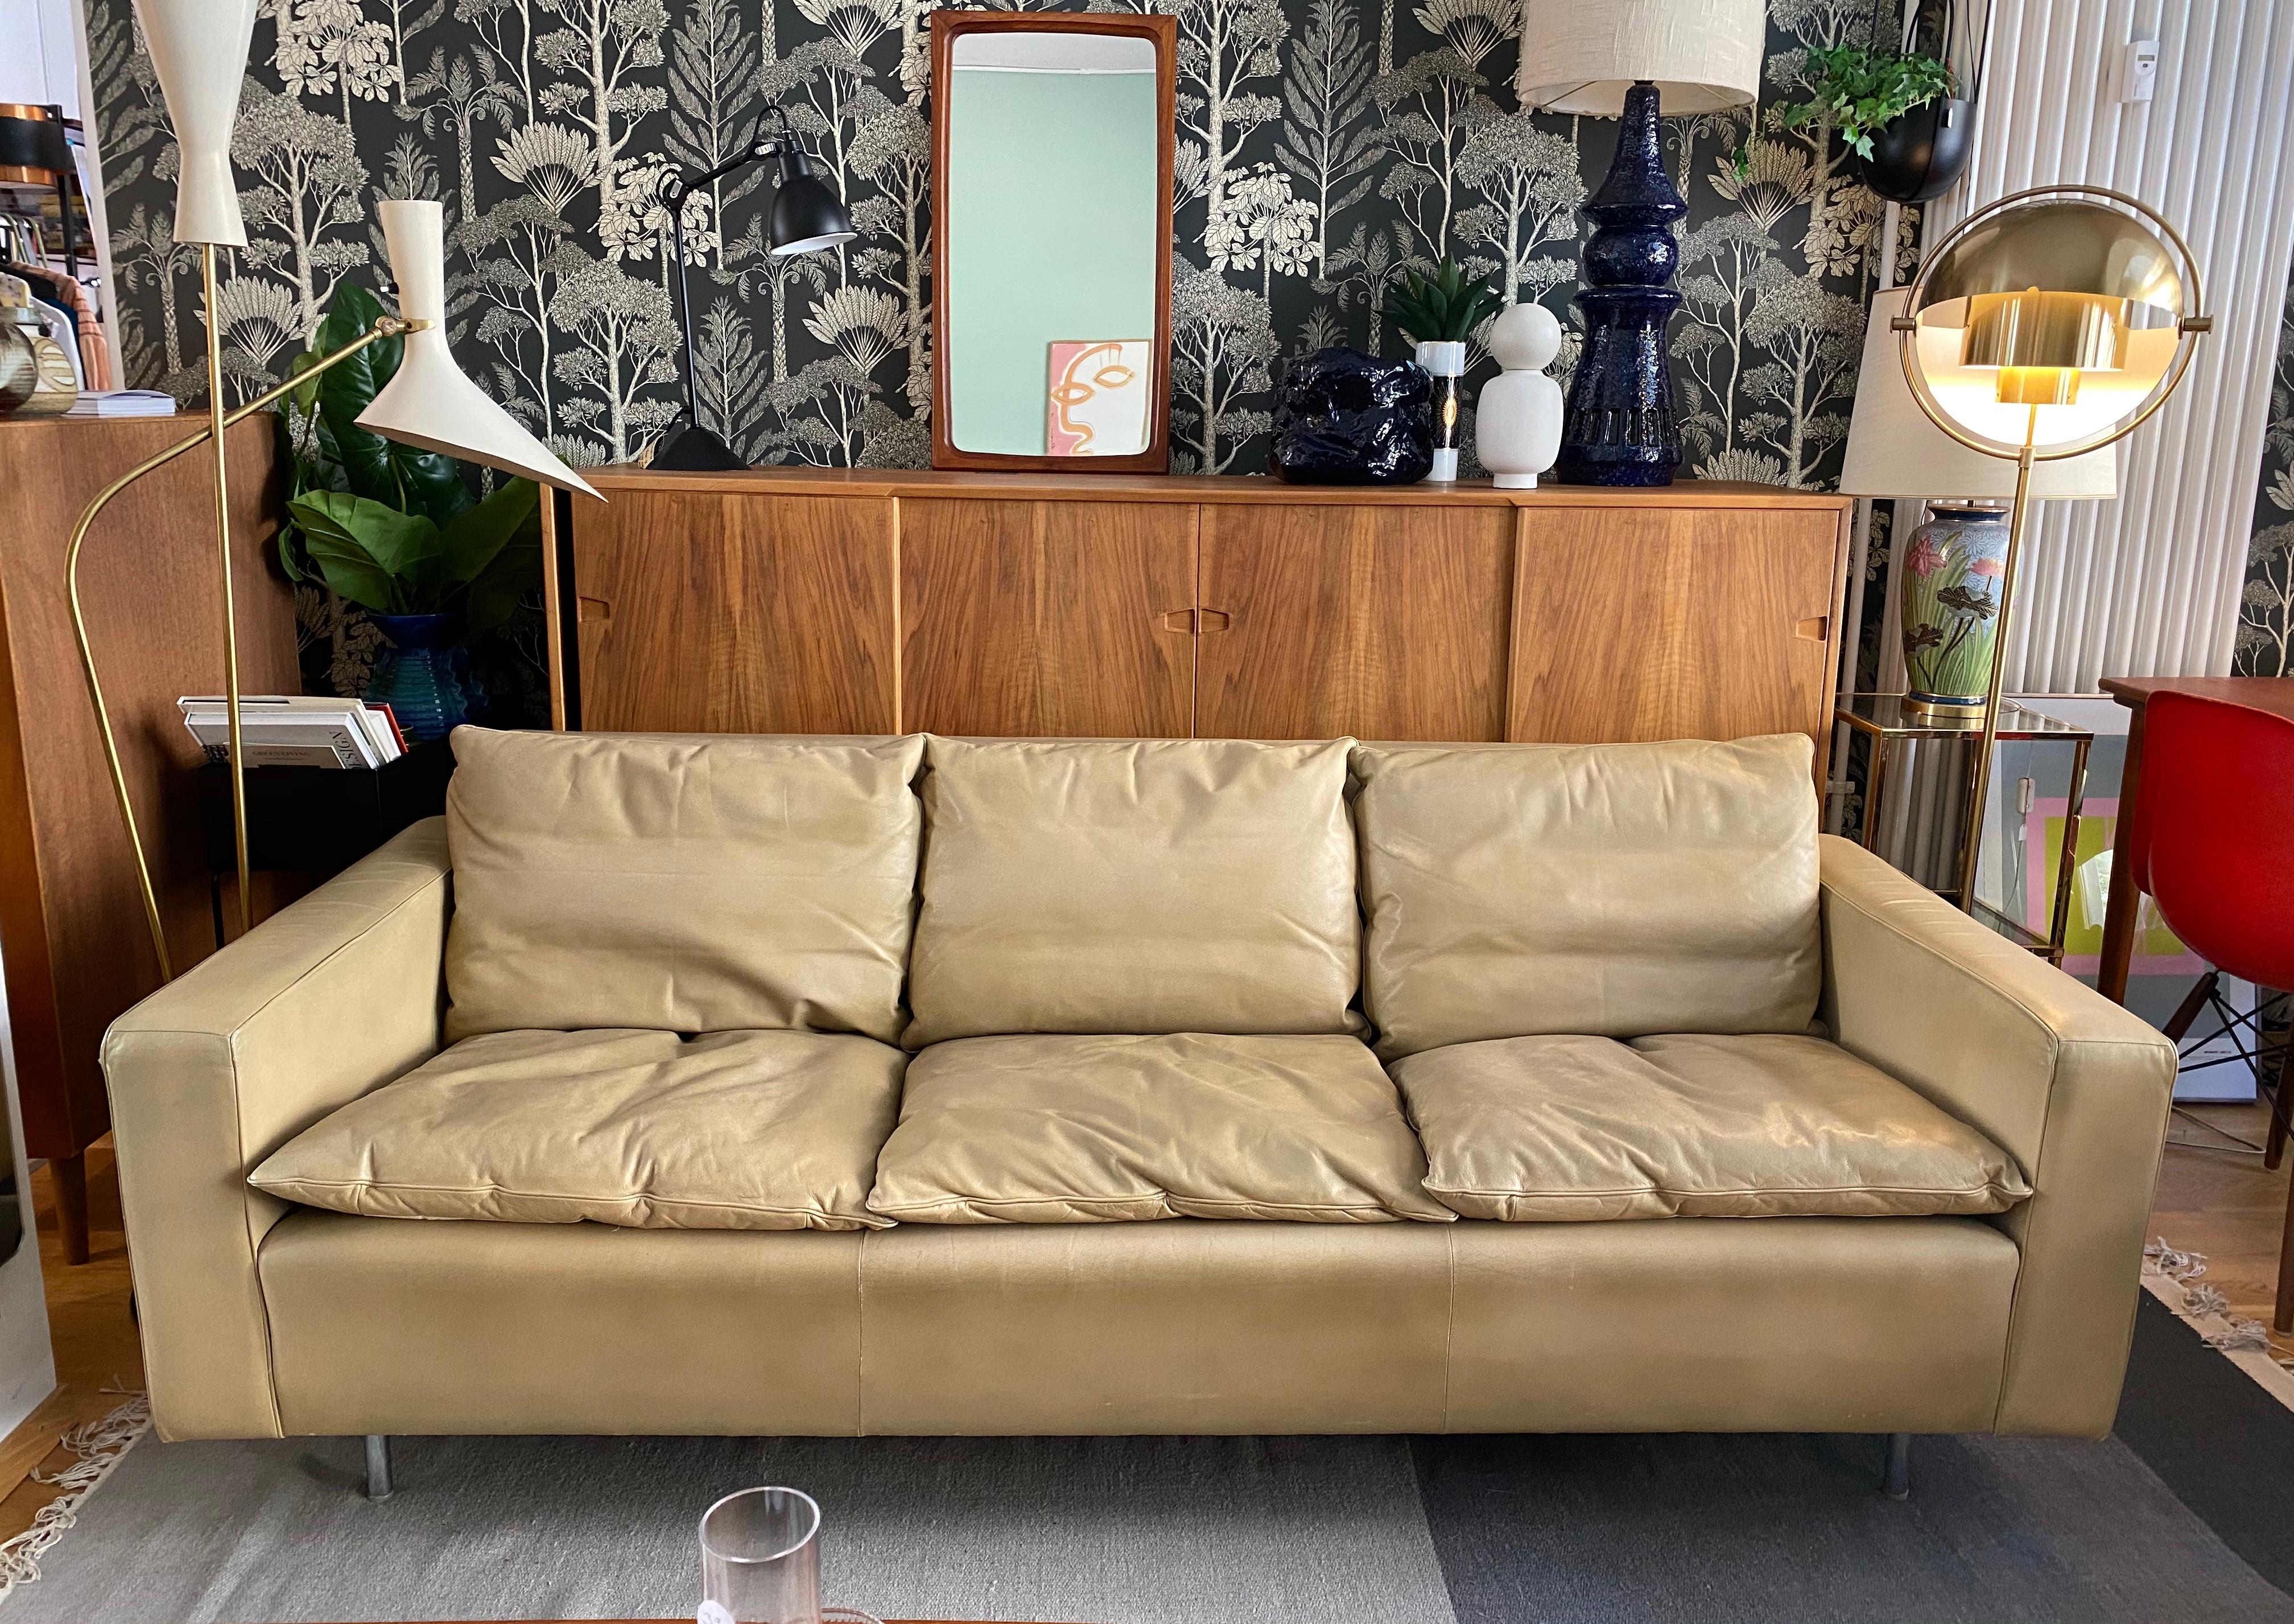 Elegant and high quality leather sofa original form the 70s, designed and produced by Hugo Peters Switzerland

Leather, beige, chrome feet

Good condition, no damage, odors or cracks in the leather. 

Dimensions: seat height: 45cm H: 72cm W: